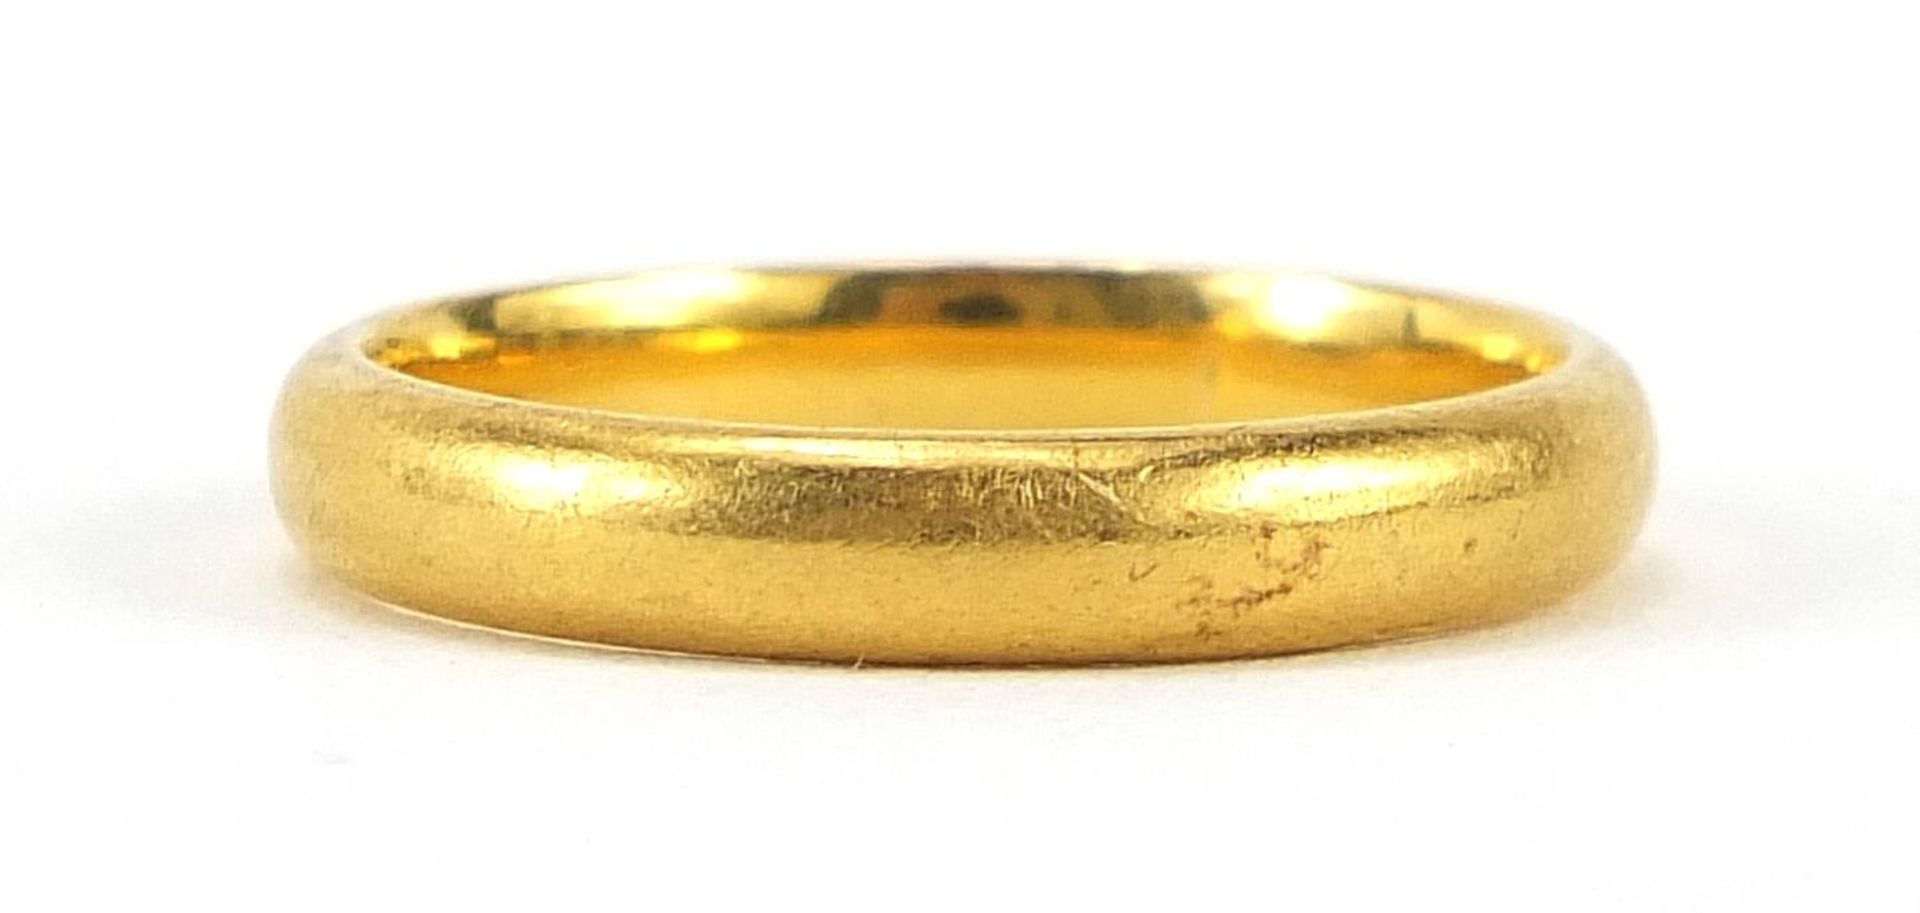 Unmarked gold wedding band (tests as 22ct gold), size N, 4.7g - this lot is sold without buyer's pr